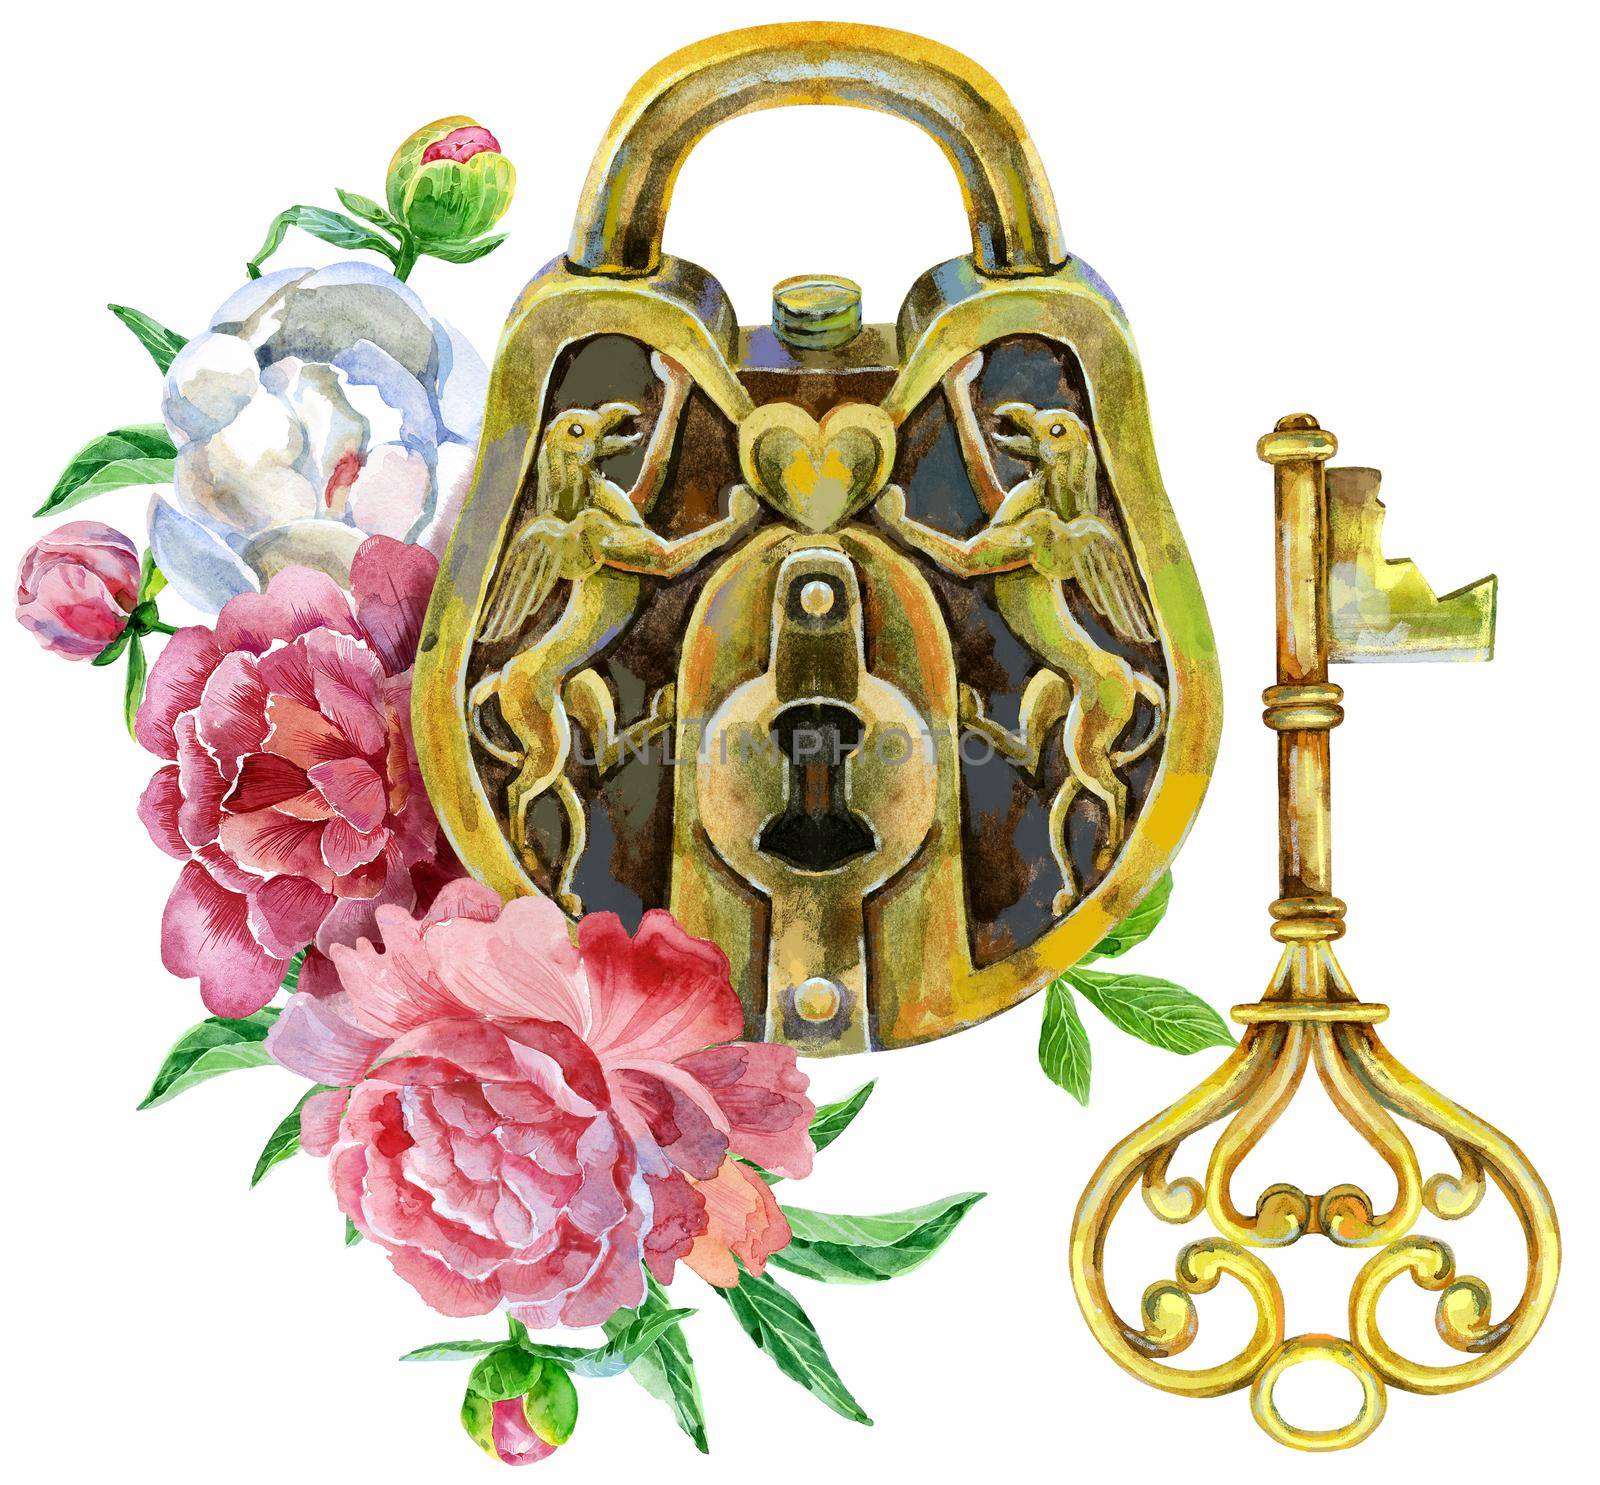 Watercolor vintage golden padlock with key and peonies isolated on white background by NataOmsk